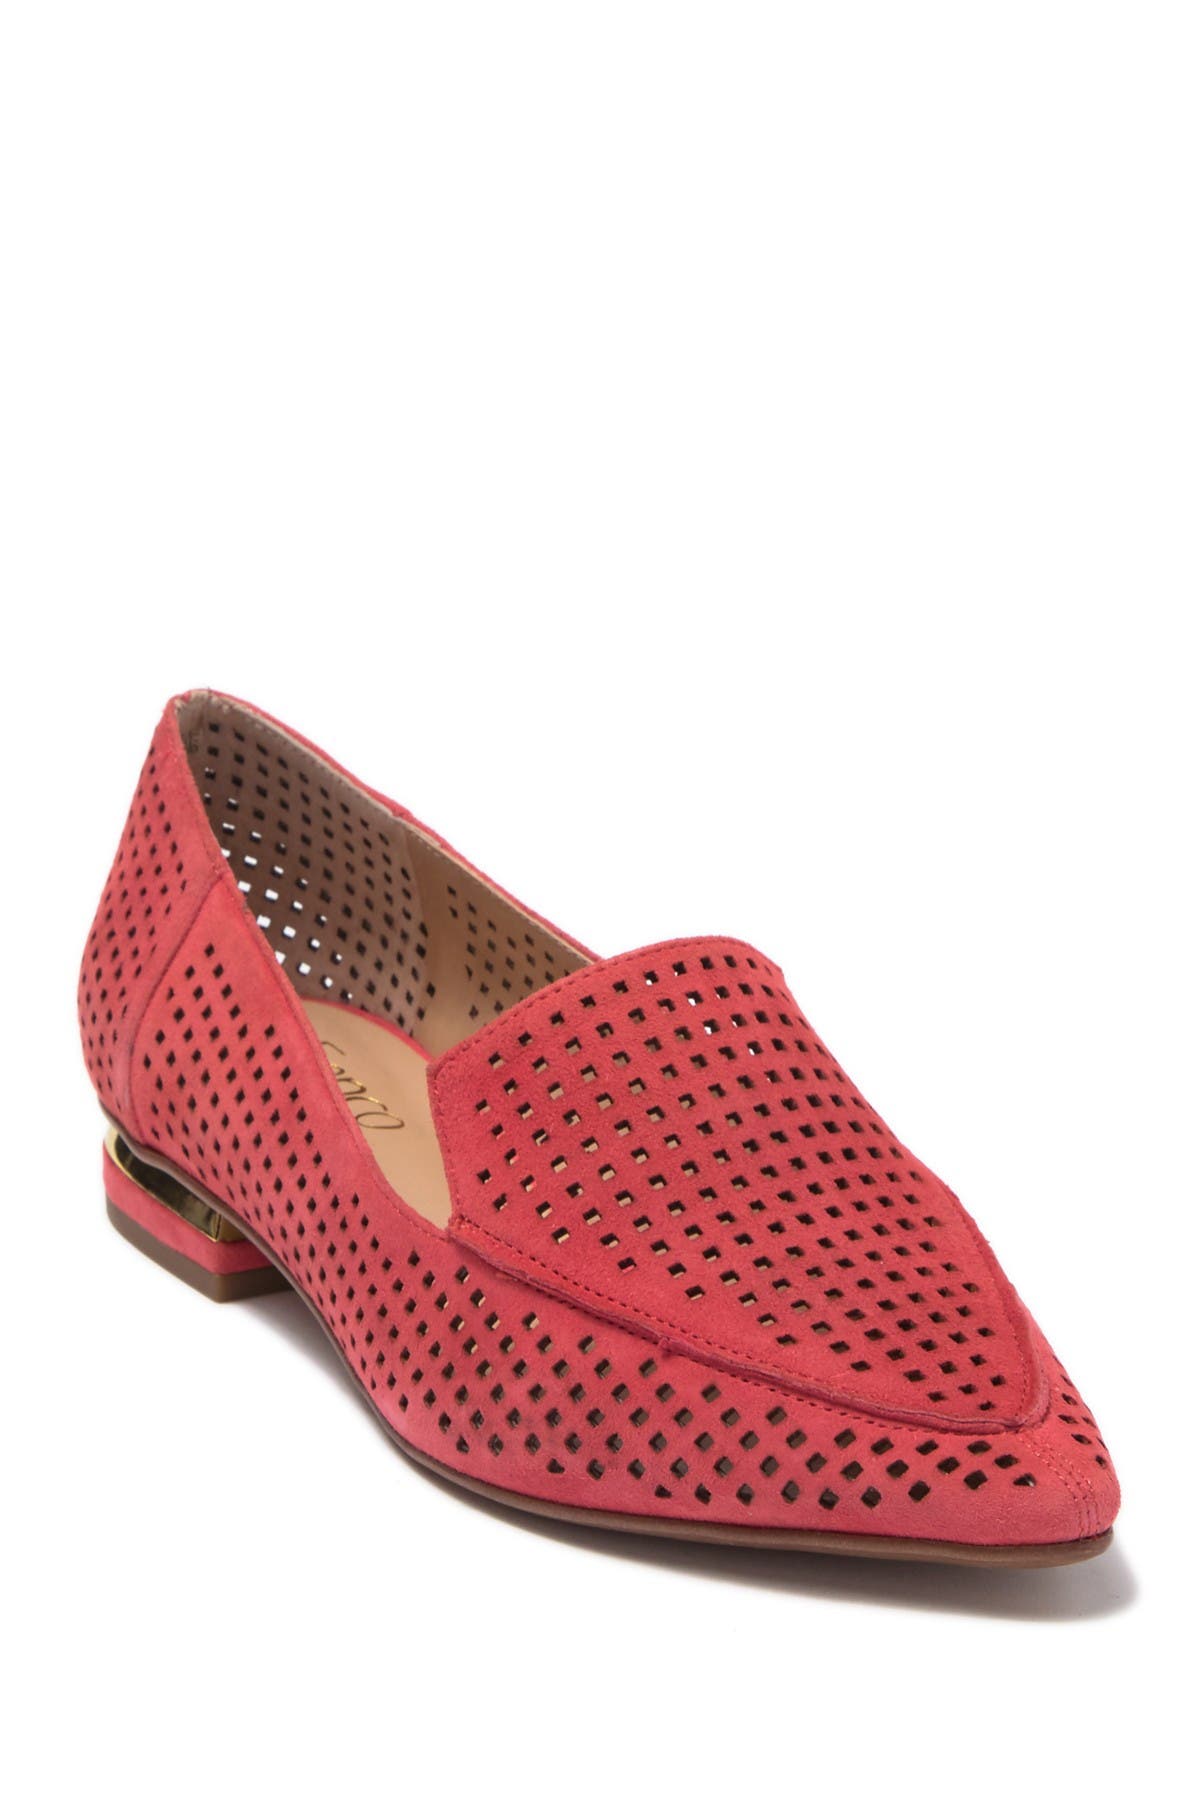 franco sarto red loafers